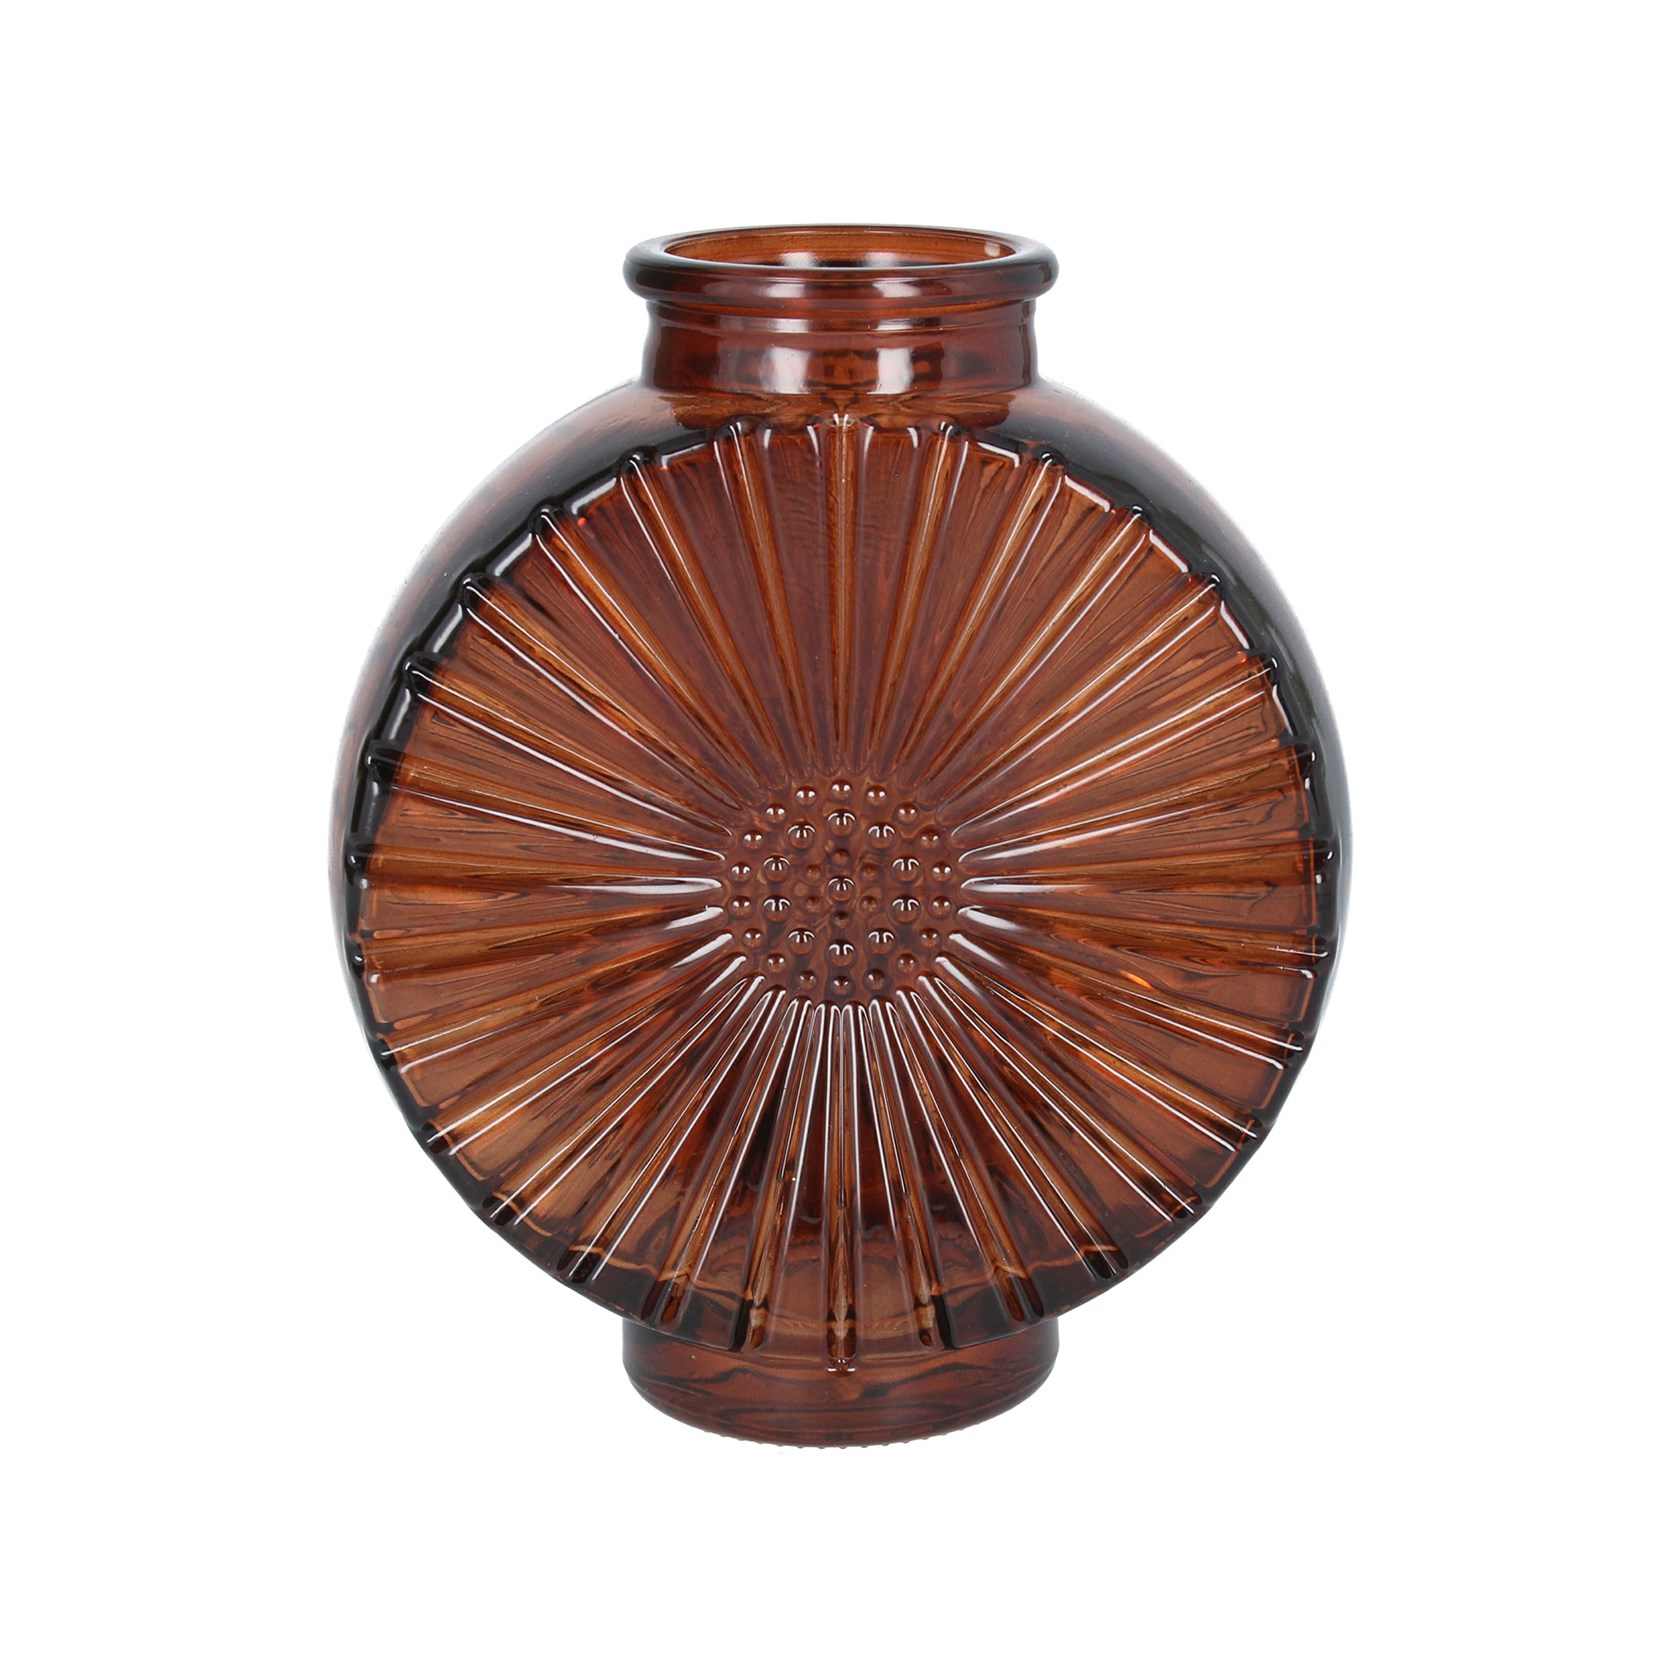 A round dark amber coloured vase with daisy detail. The perfect addition to your home or the perfect gift for yourself or a loved one. By London designer Gisela Graham.